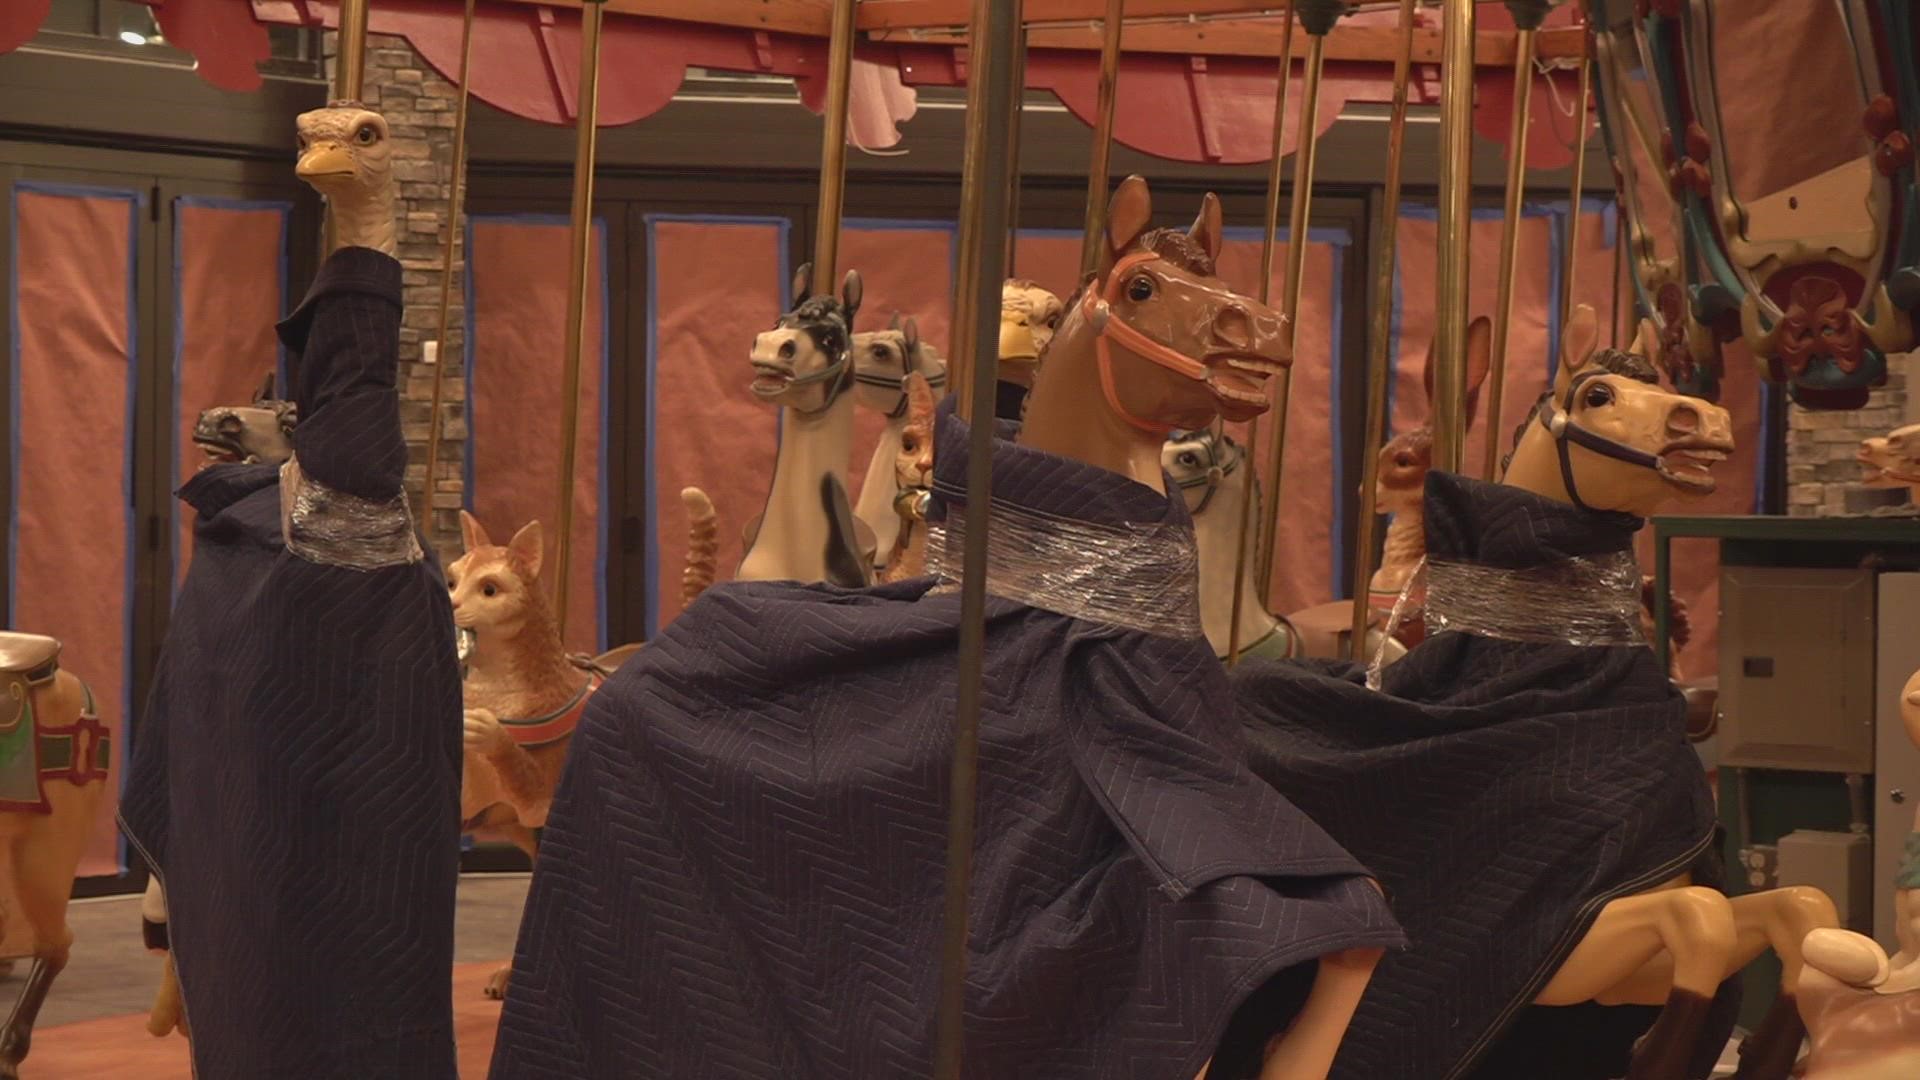 After three years of repair work, the city announced the carousel could reopen as soon as December 22.